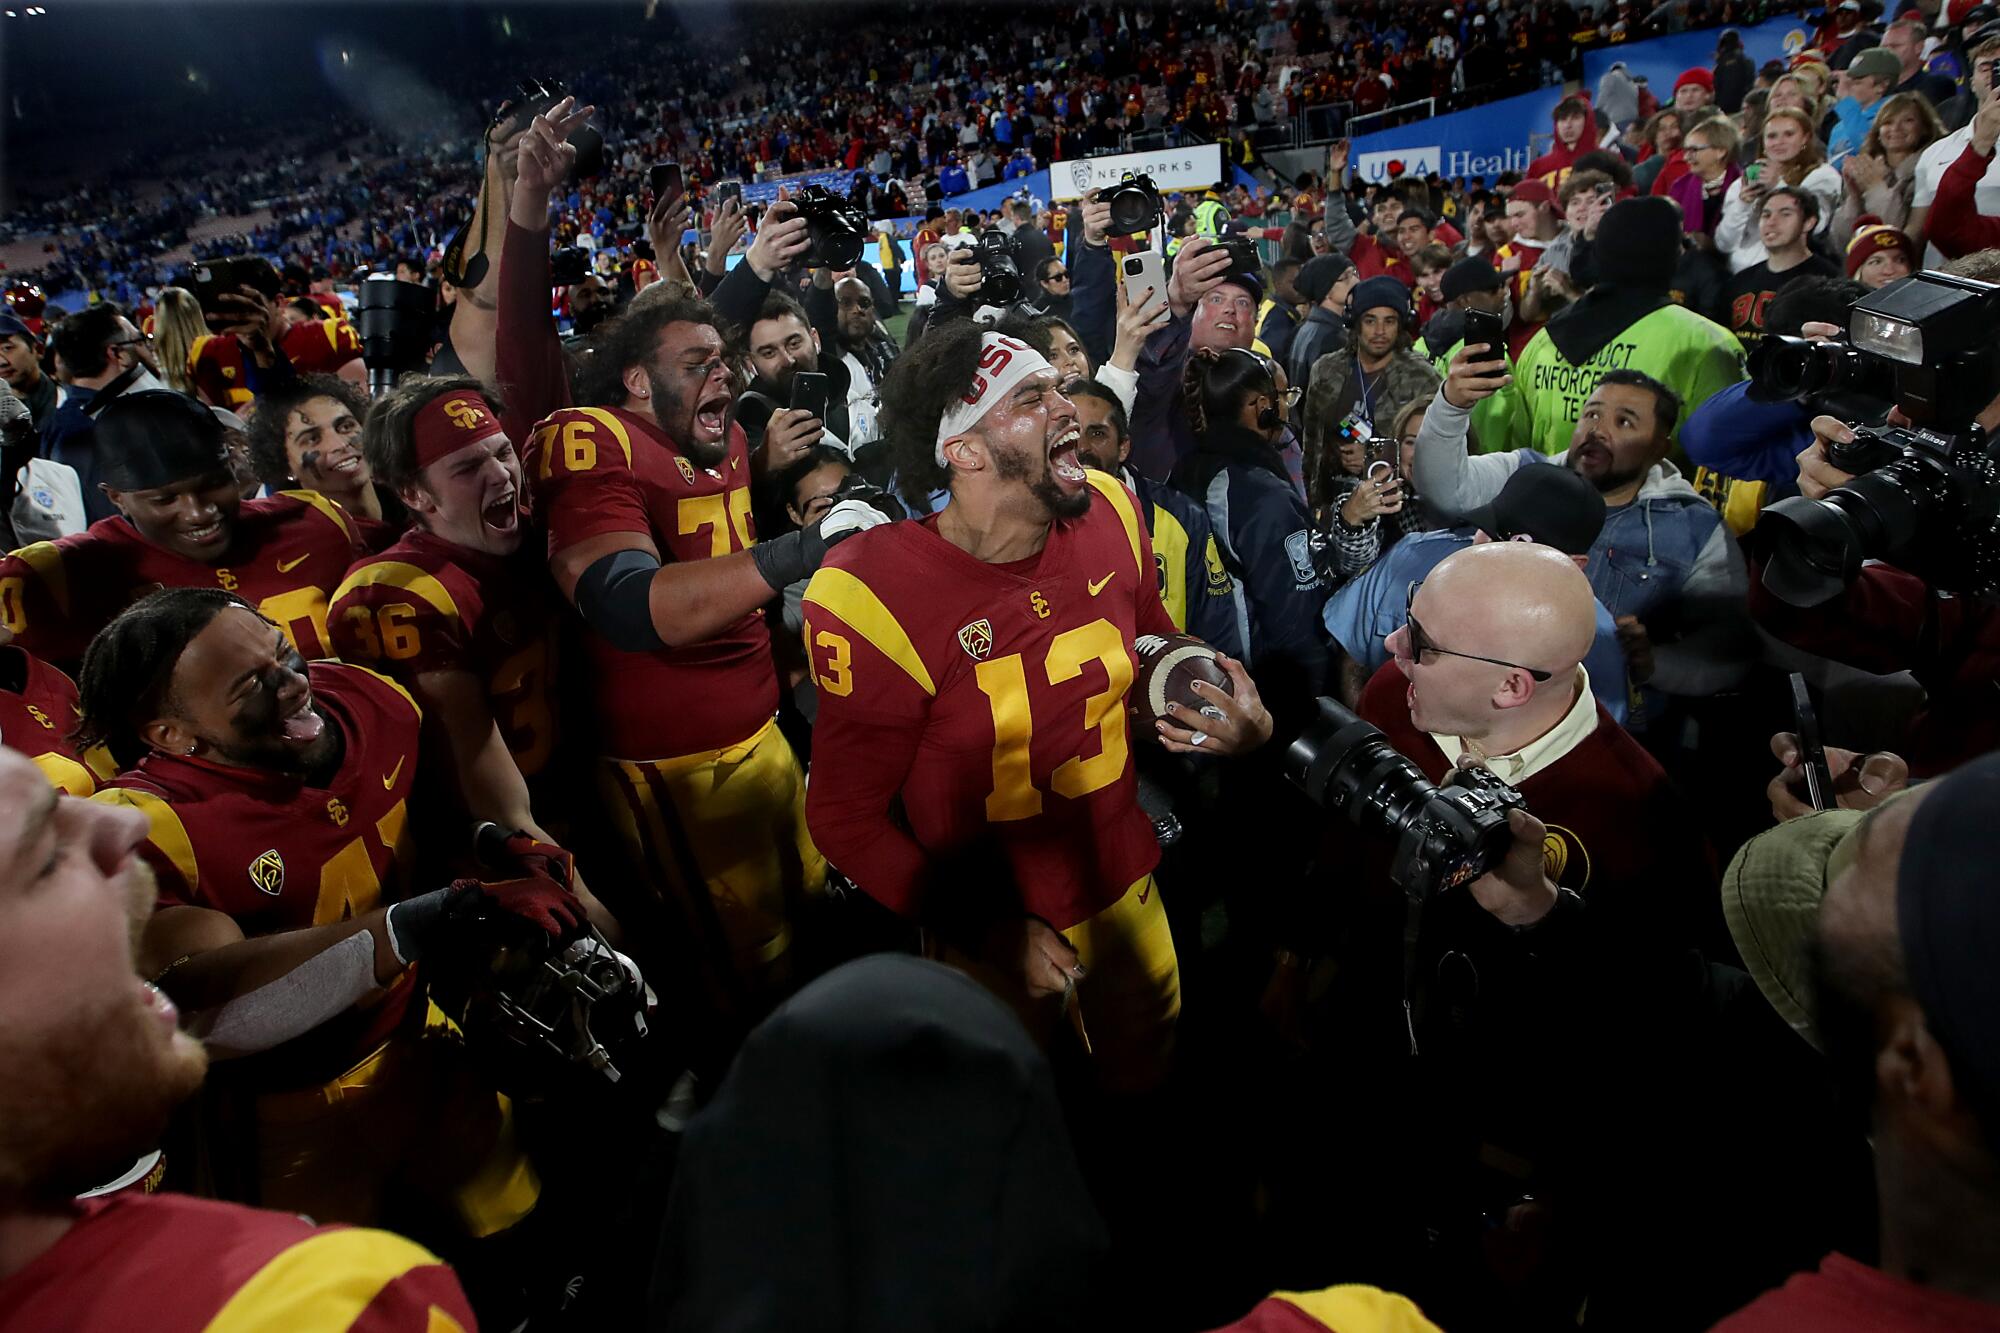 USC quarterback Caleb Williams, center, celebrates with teammates after a 48-45 win over crosstown rival UCLA.